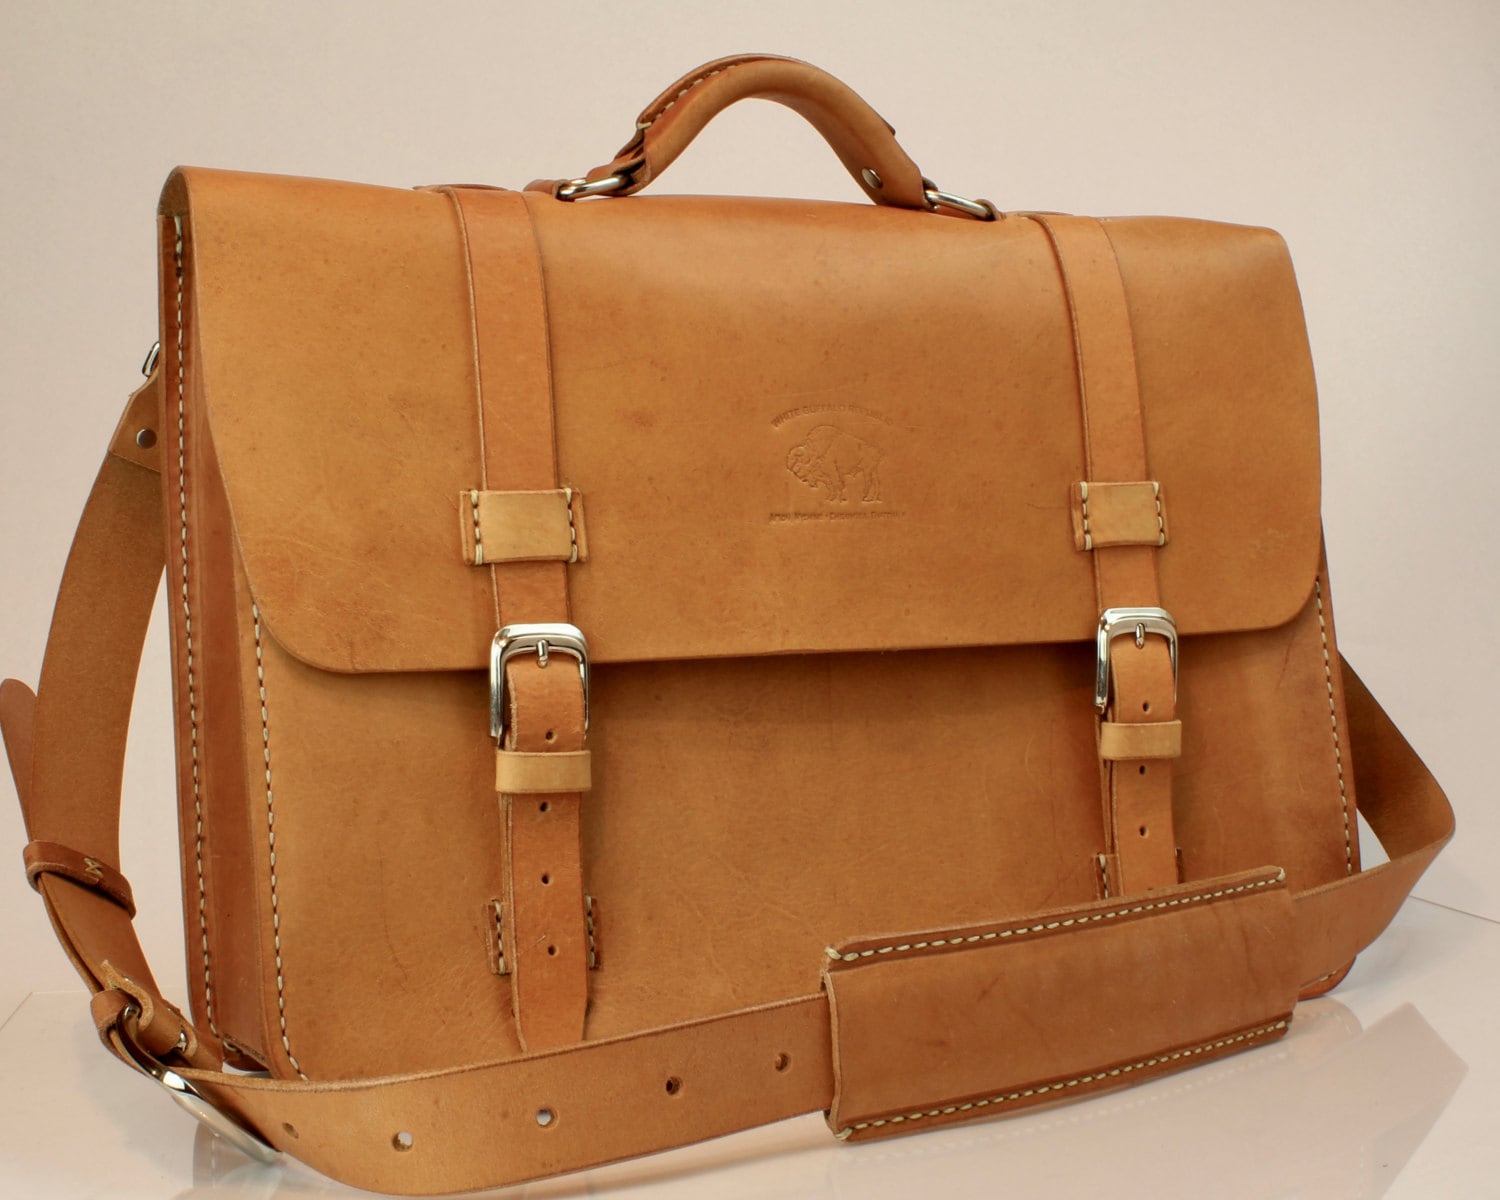 Rustic Distressed Leather Messenger Bag Briefcase Laptop